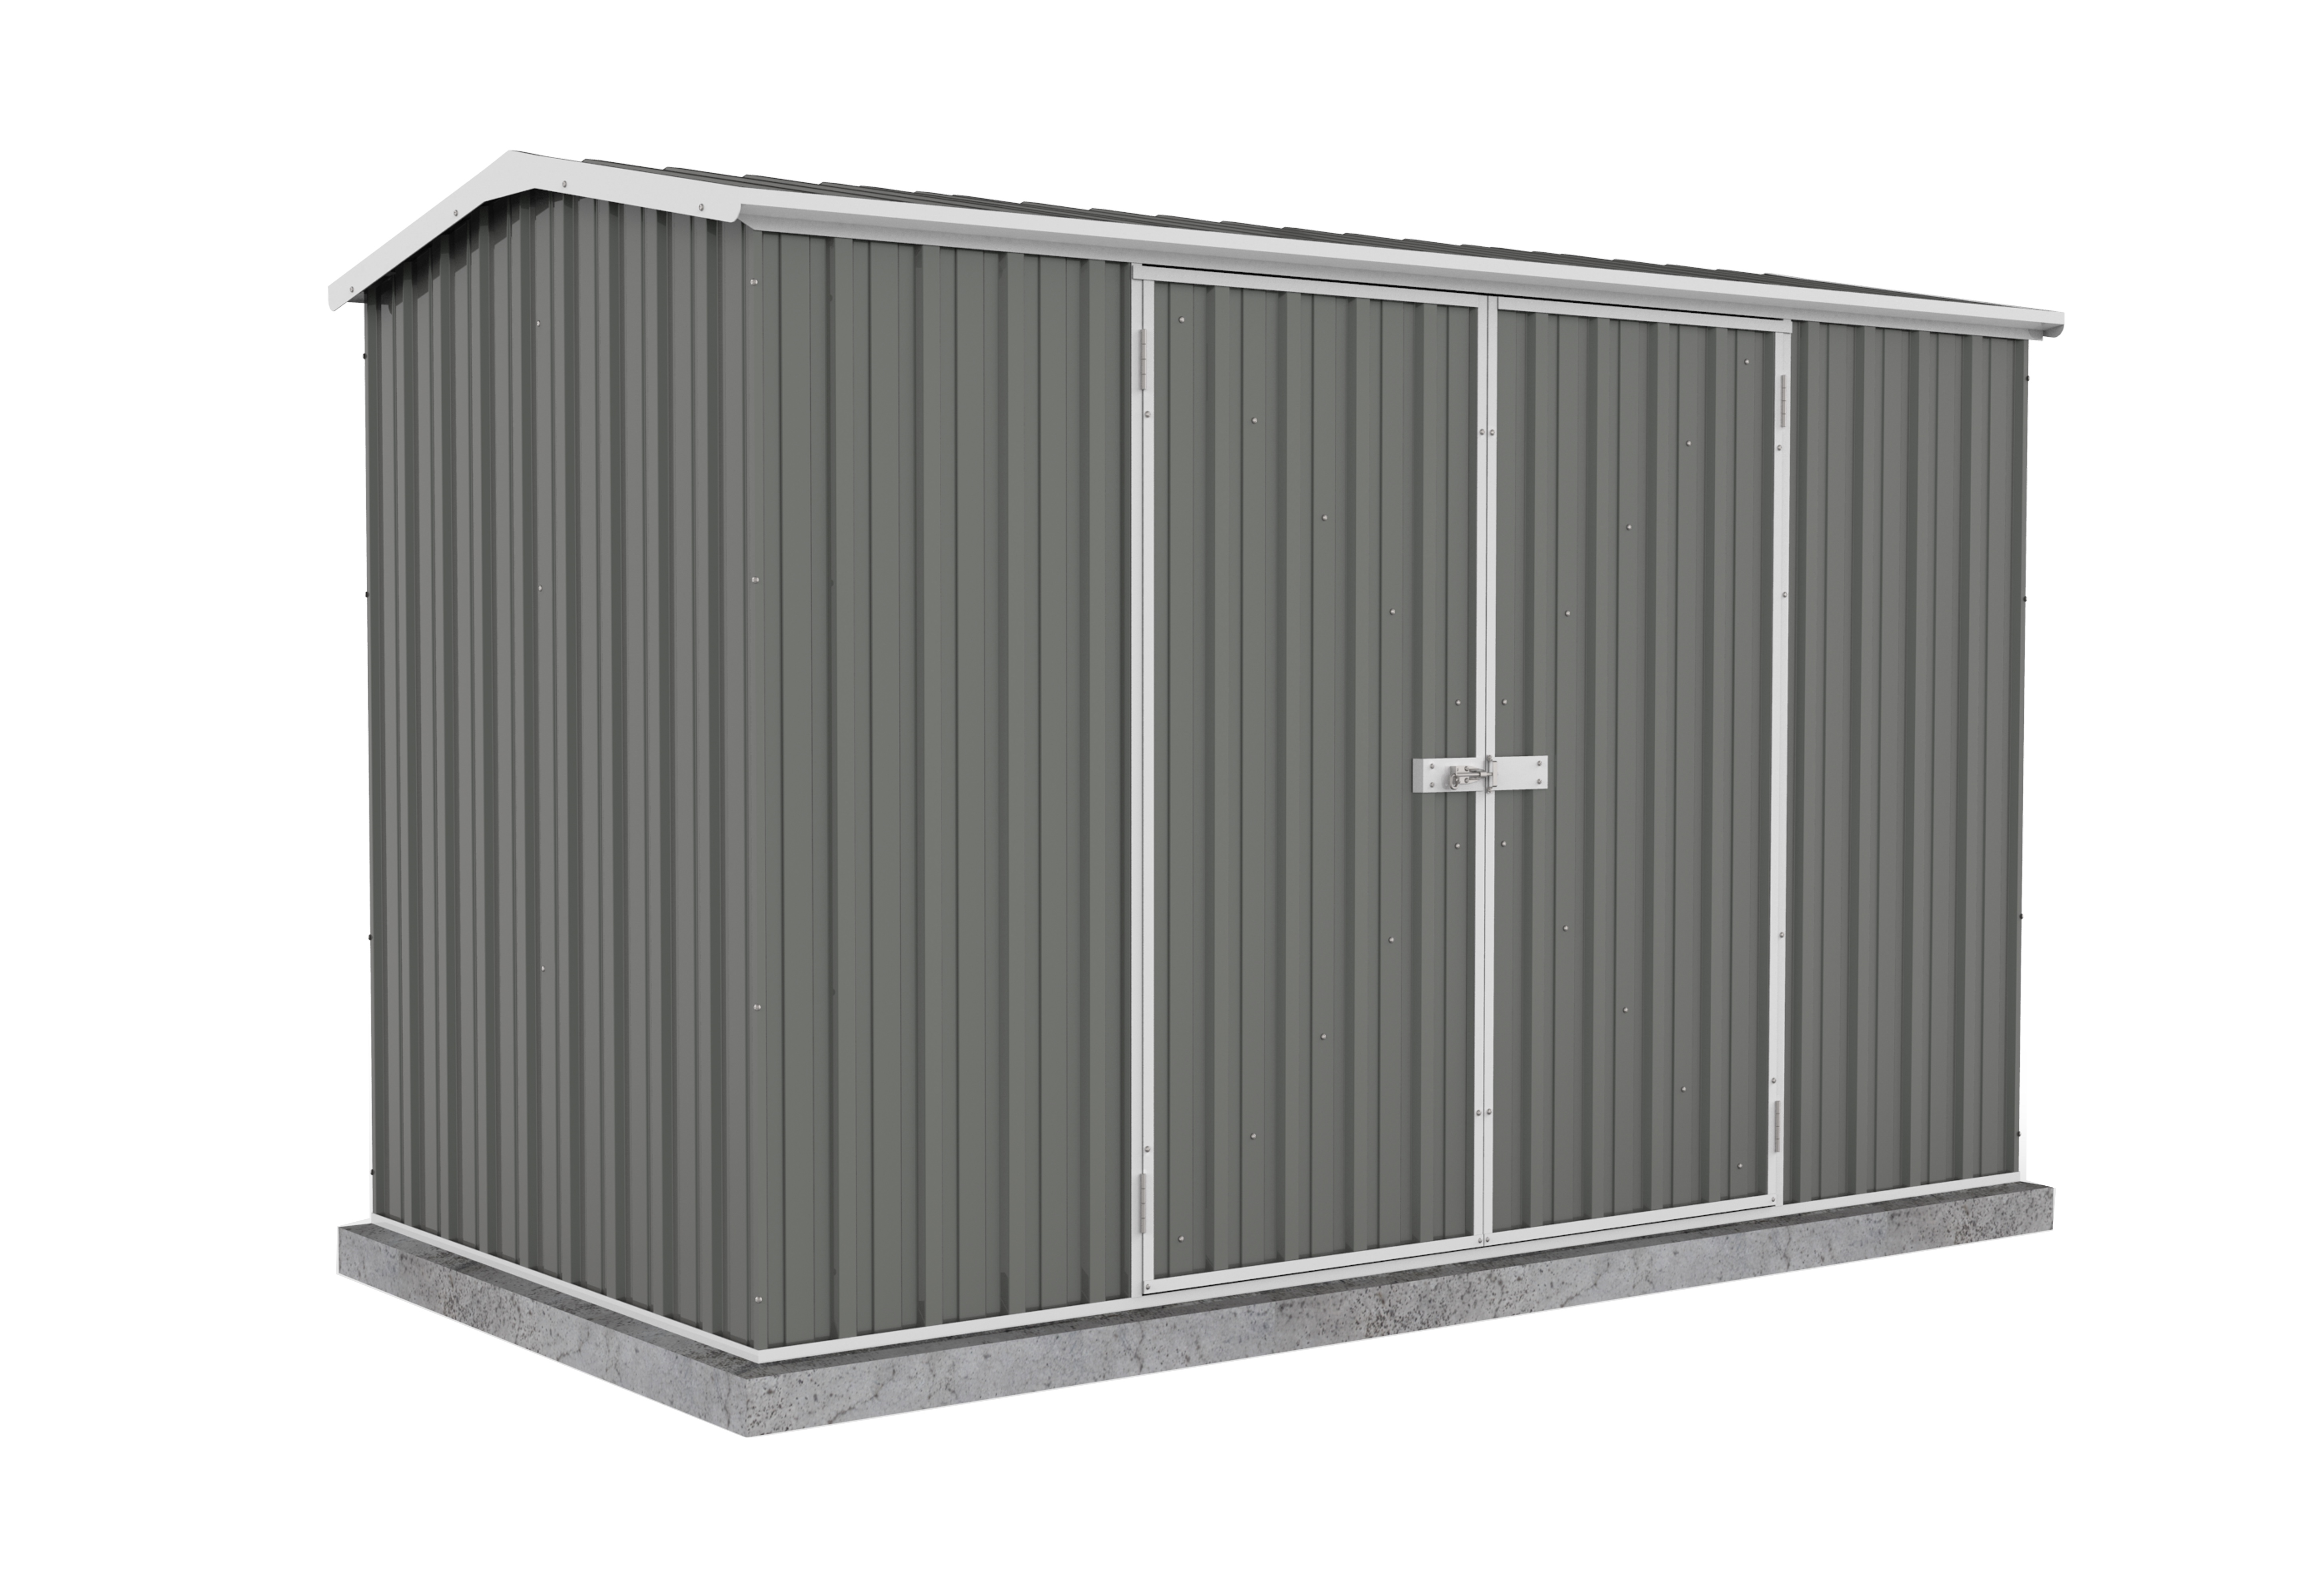 Absco Shed Premier 10 x 5 ft. Galvanized Steel and Metal Storage Shed, Gray - image 1 of 11